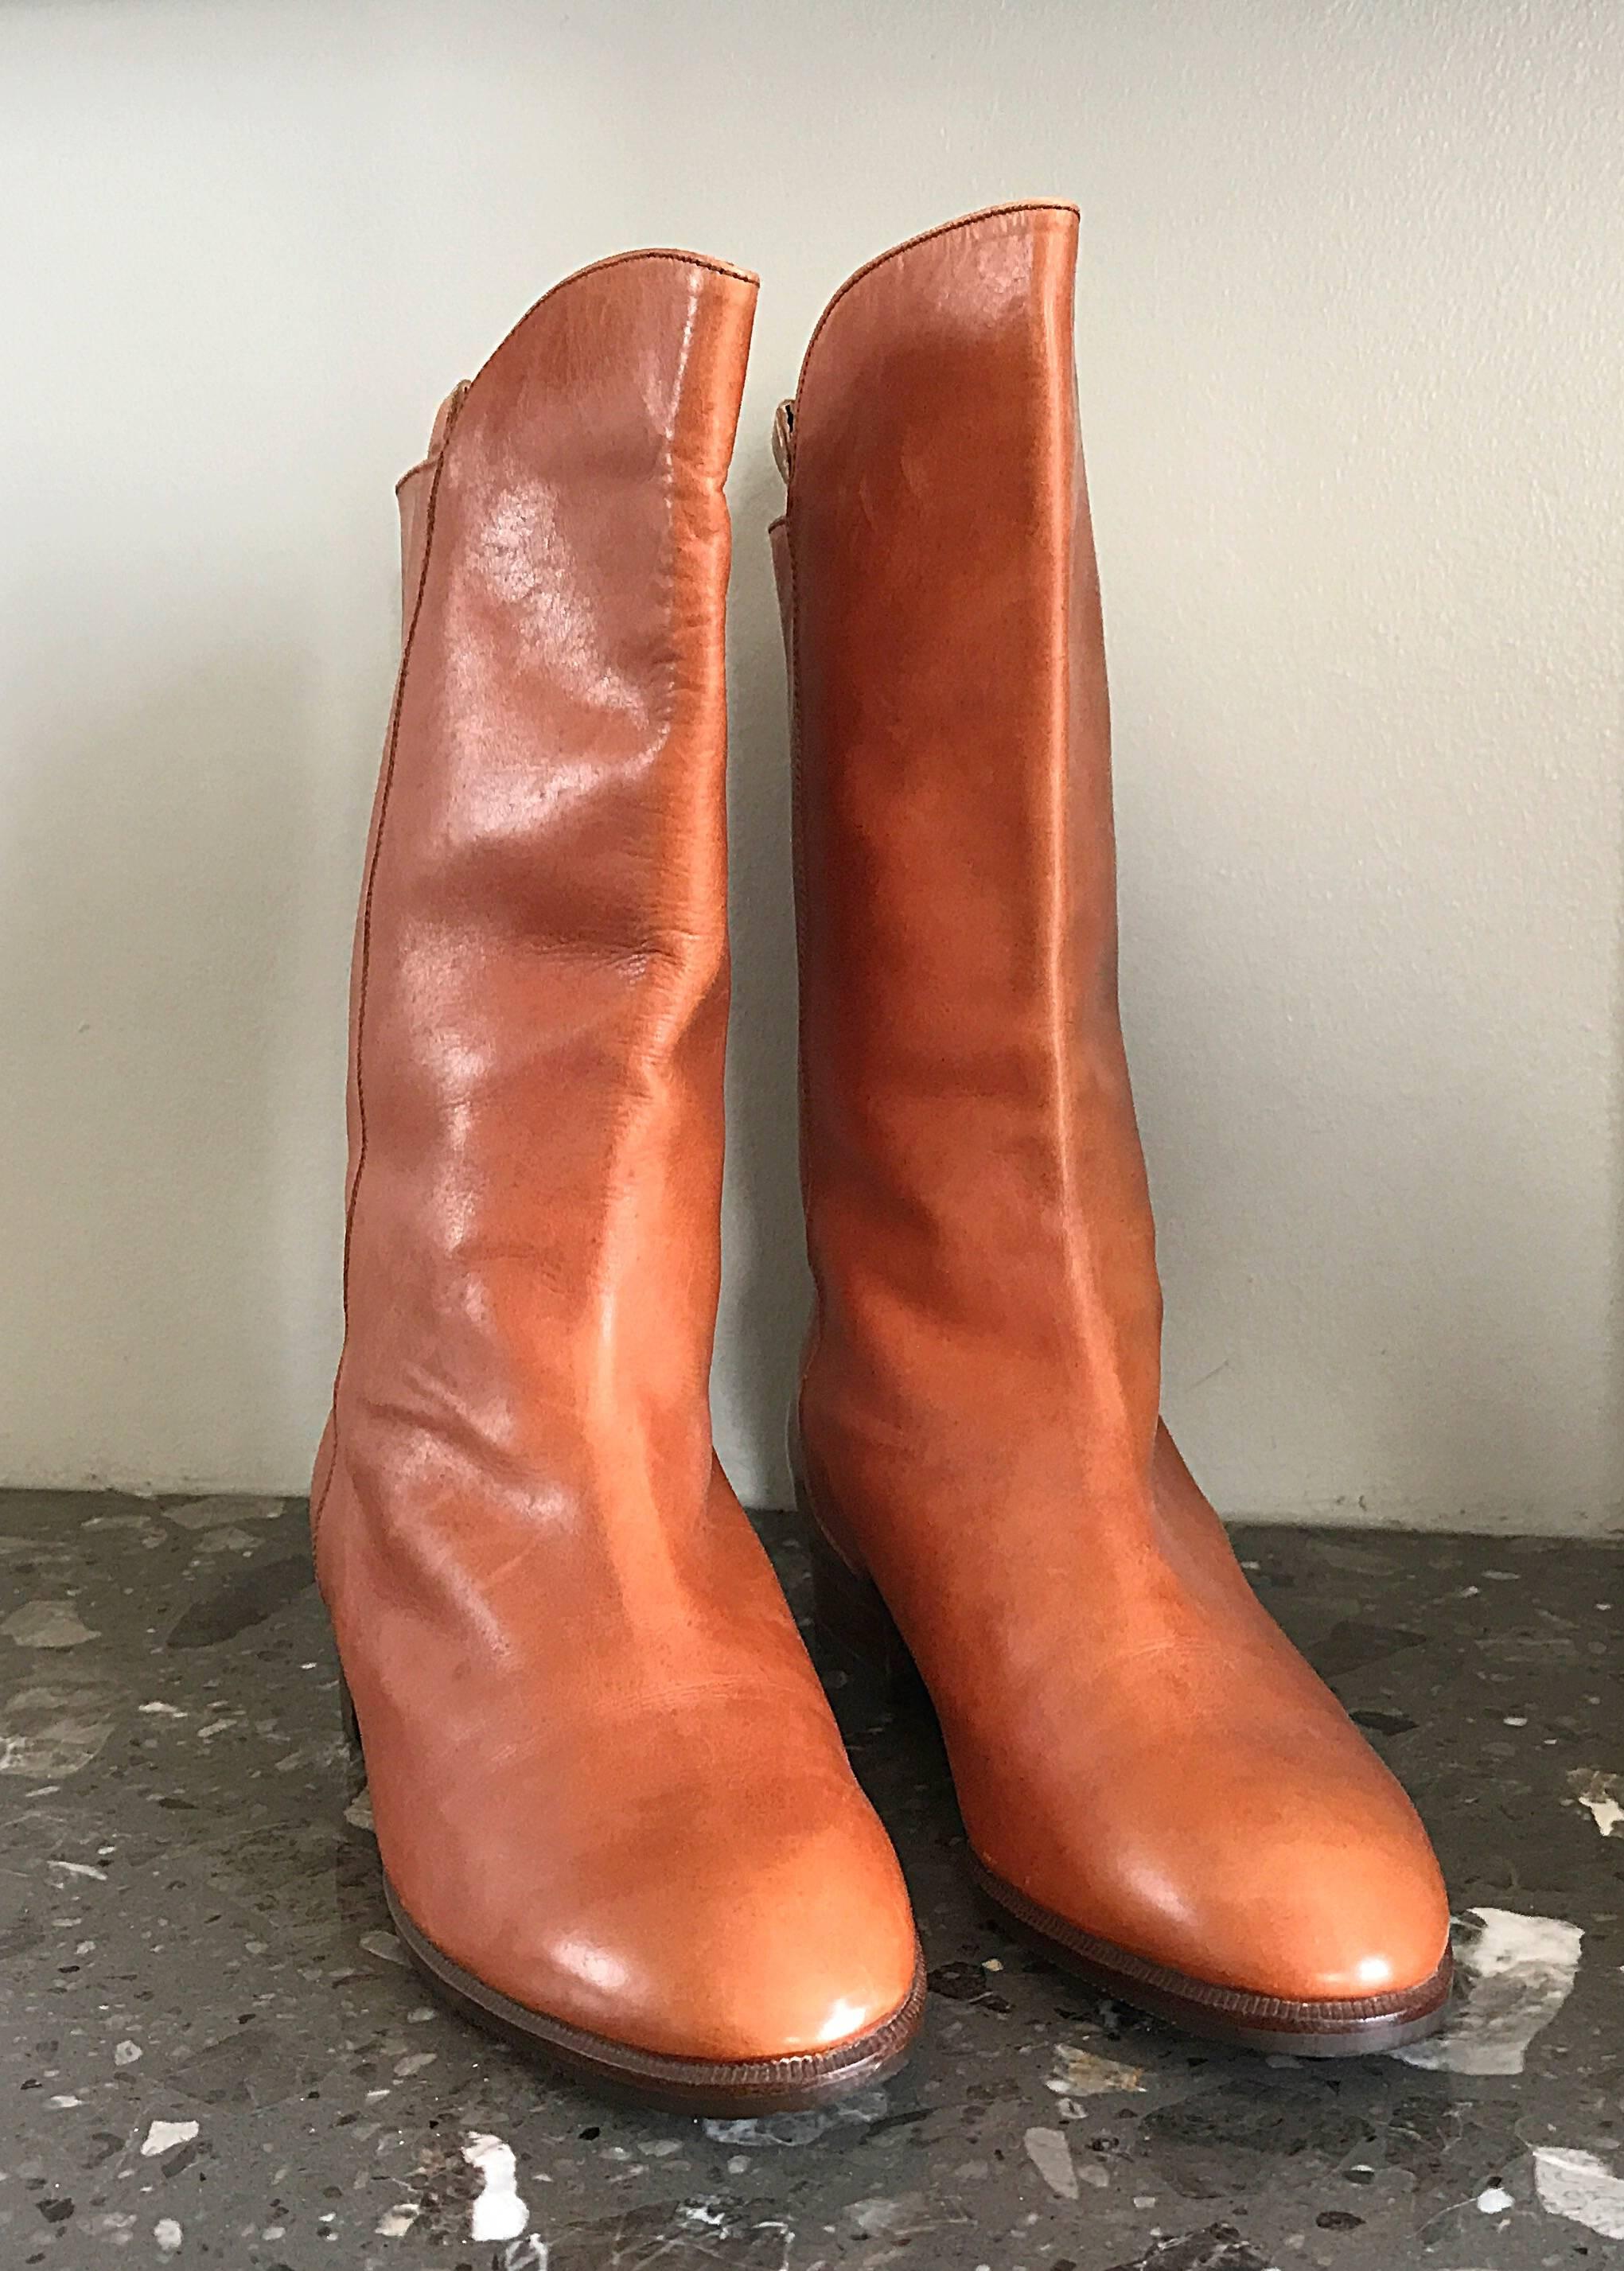 New 1980s Perry Ellis Size 6 Tan Saddle Leather Deadstock Calf Booties Boots In New Condition For Sale In San Diego, CA